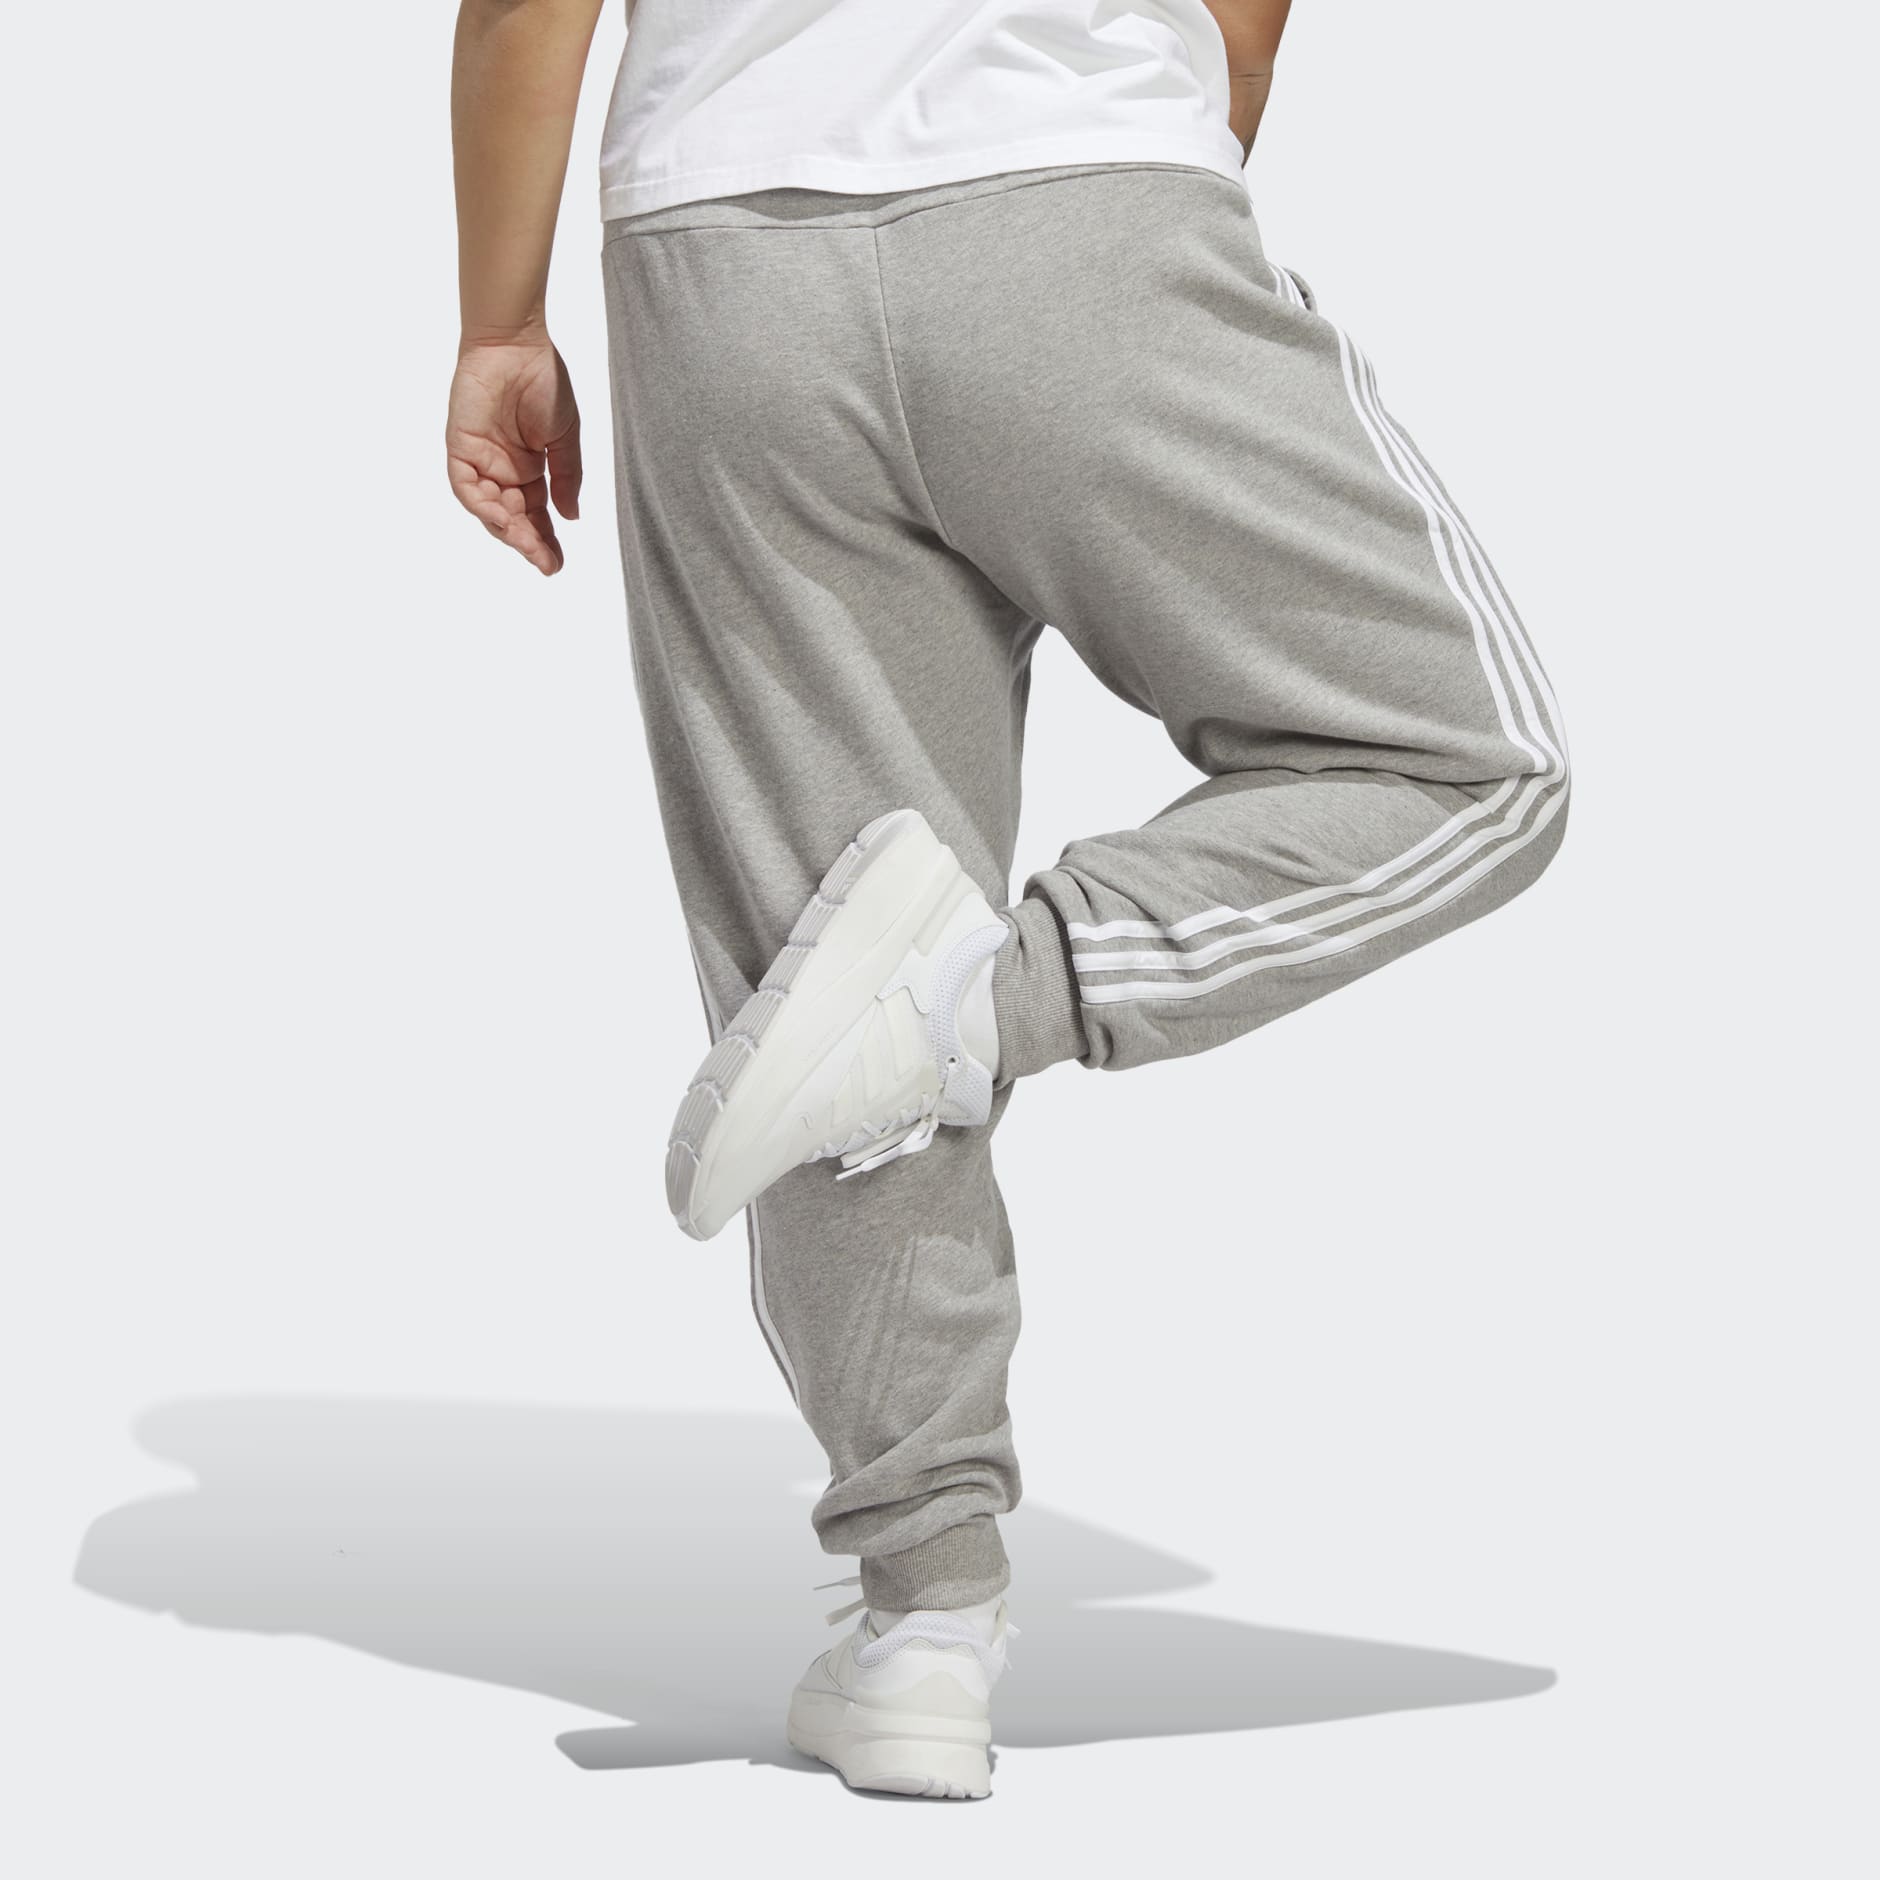 adidas - Women's Essentials 3 Stripes French Terry Cuffed Pants